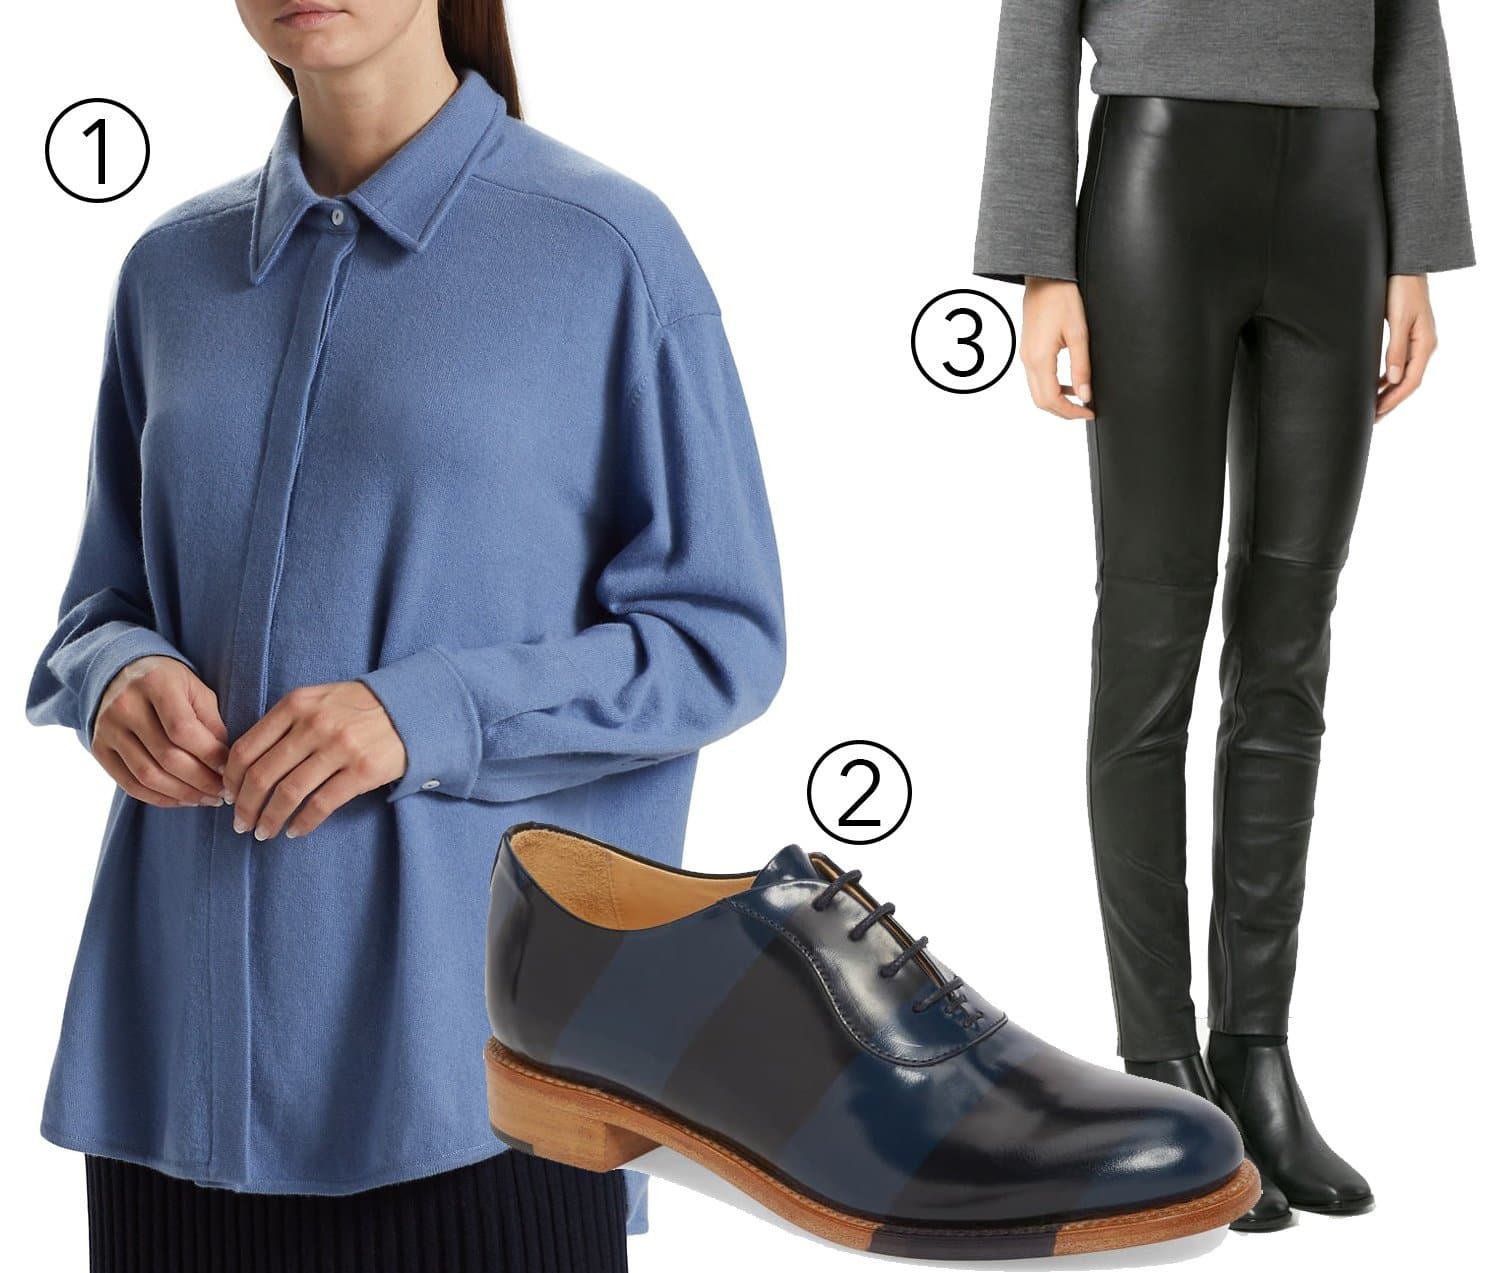 1. Pair an arch4 New Bonnie cashmere shirt for softness; 2. with Uma | Raquel Davidowicz Silicio leather pants for edge; 3. and The Office of Angela Scott Mr. Smith stripe Oxfords for a distinctive touch